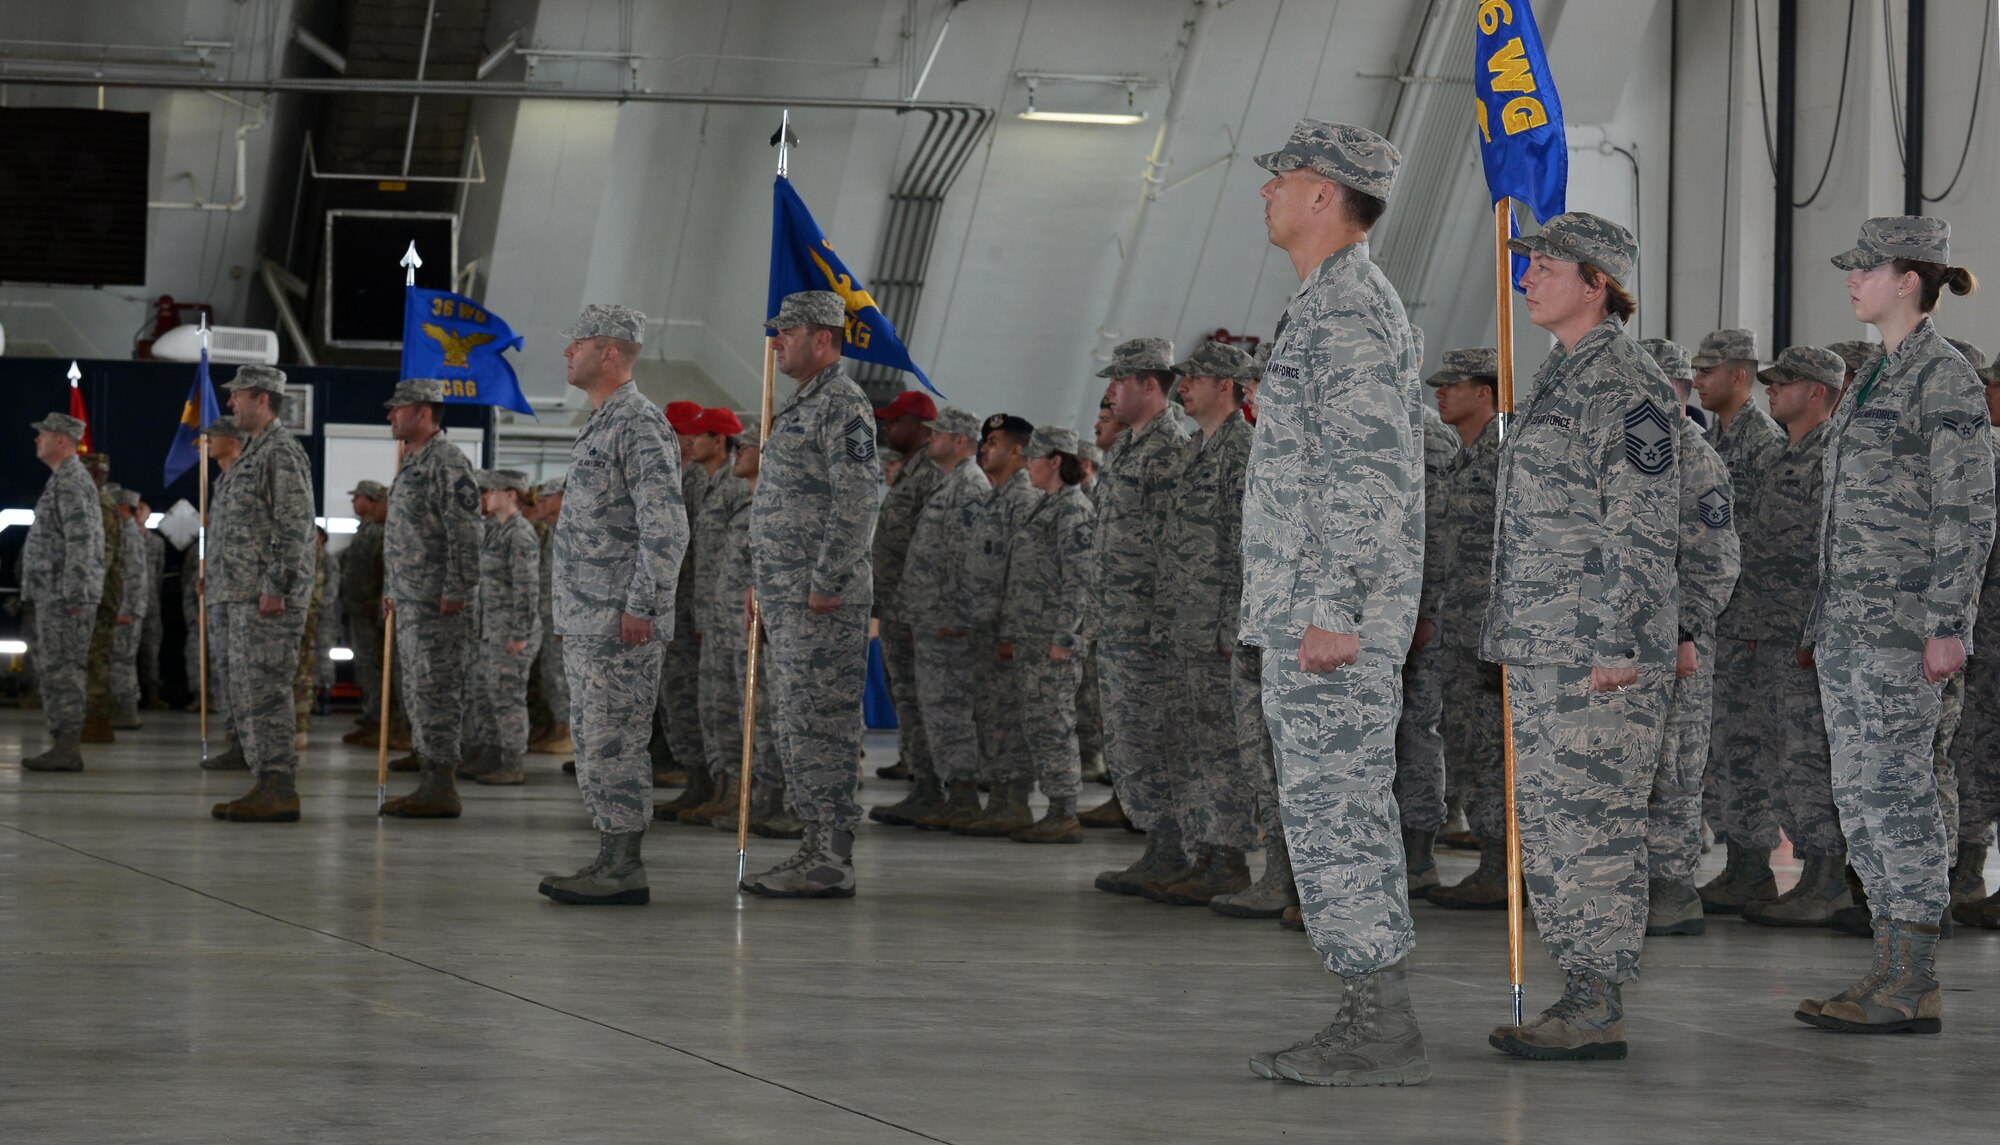 Airmen and Soldiers assigned to Andersen Air Force Base stand in formation during the 36th Wing change of command ceremony May 6, 2016, at Andersen AFB, Guam. A change of command is a military tradition that represents a formal transfer of authority and responsibility for a unit from one commanding or flag officer to another. (U.S. Air Force photo by Airman 1st Class Arielle Vasquez/Released) 